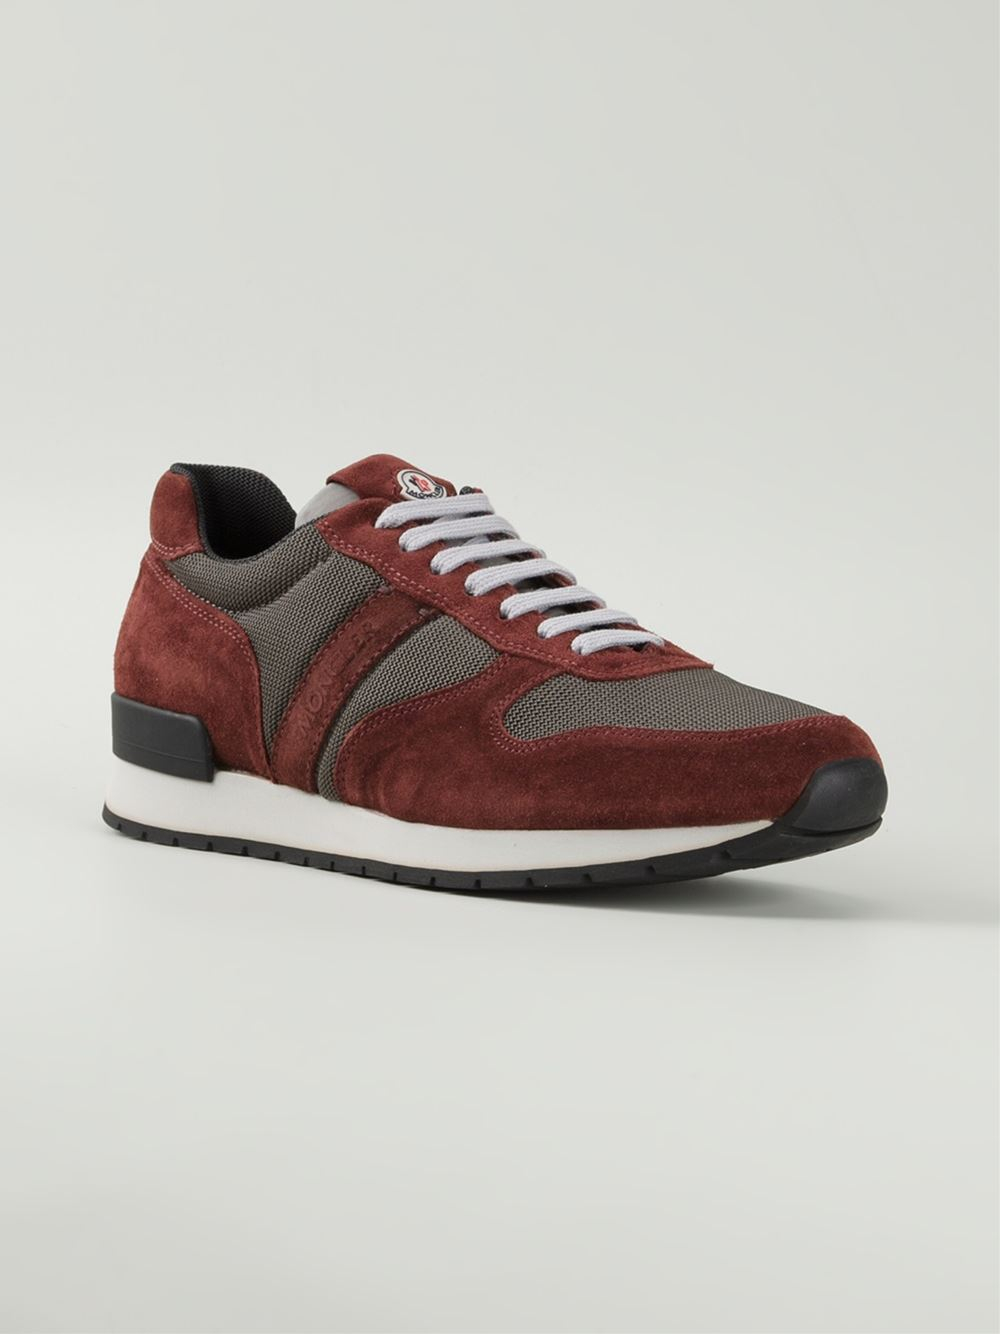 Lyst - Moncler Montego Sneakers in Red for Men